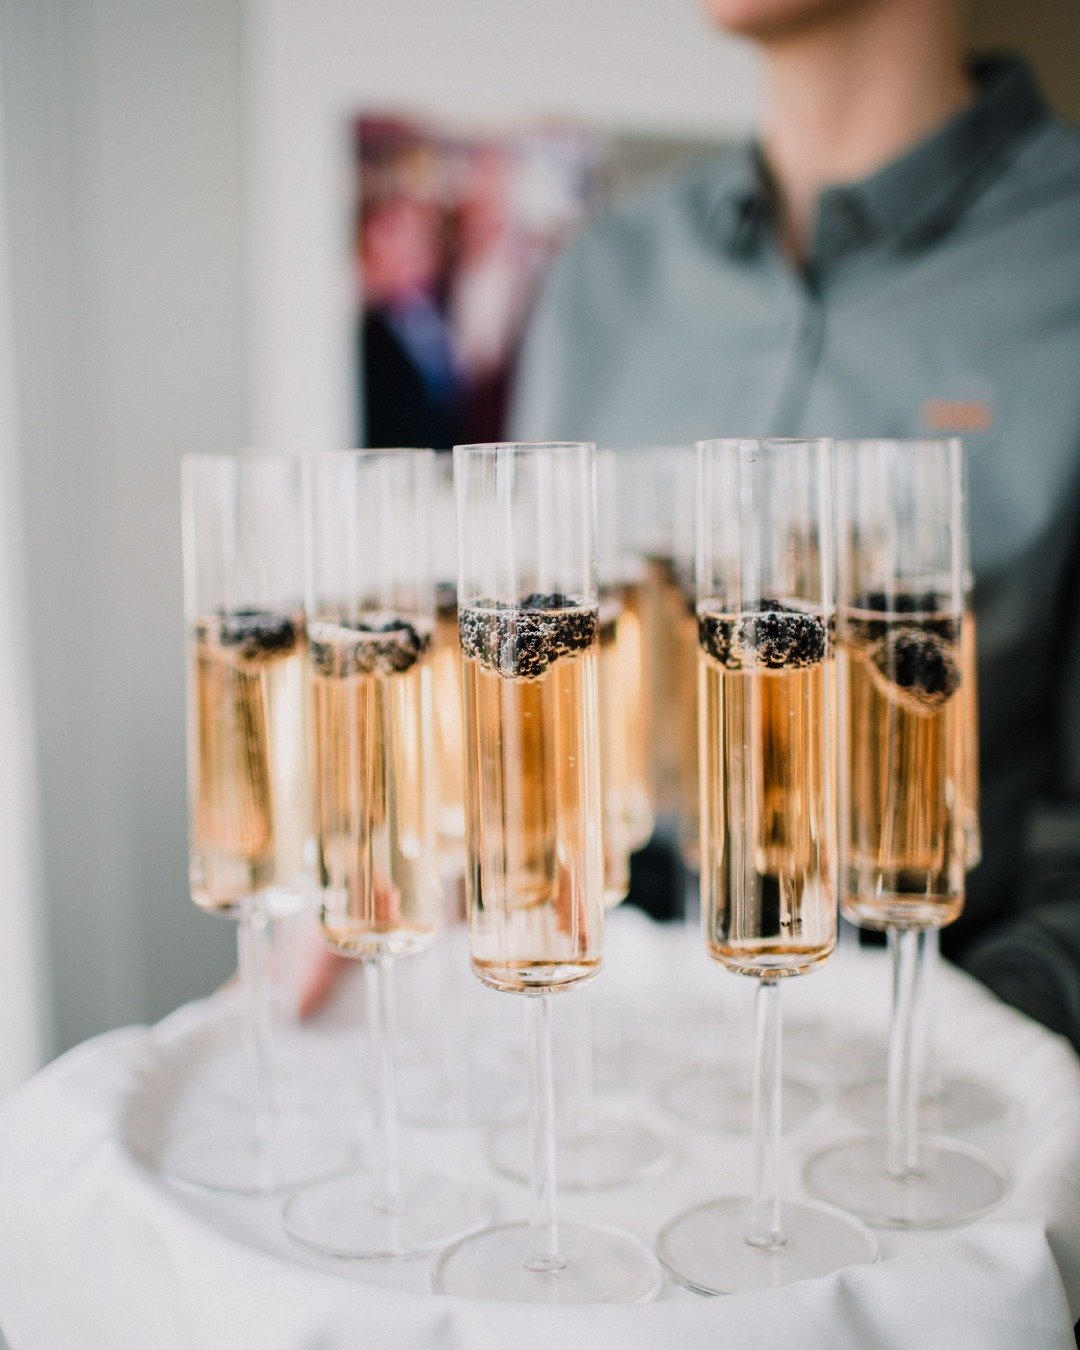 🥂Raise a glass to unforgettable moments with Narrative XC Method Sparkling!🥂

We take pride in showcasing incredible local products that elevate every celebration. Cheers to making memories with exceptional taste! 🍾

Location @universityofbc Rober